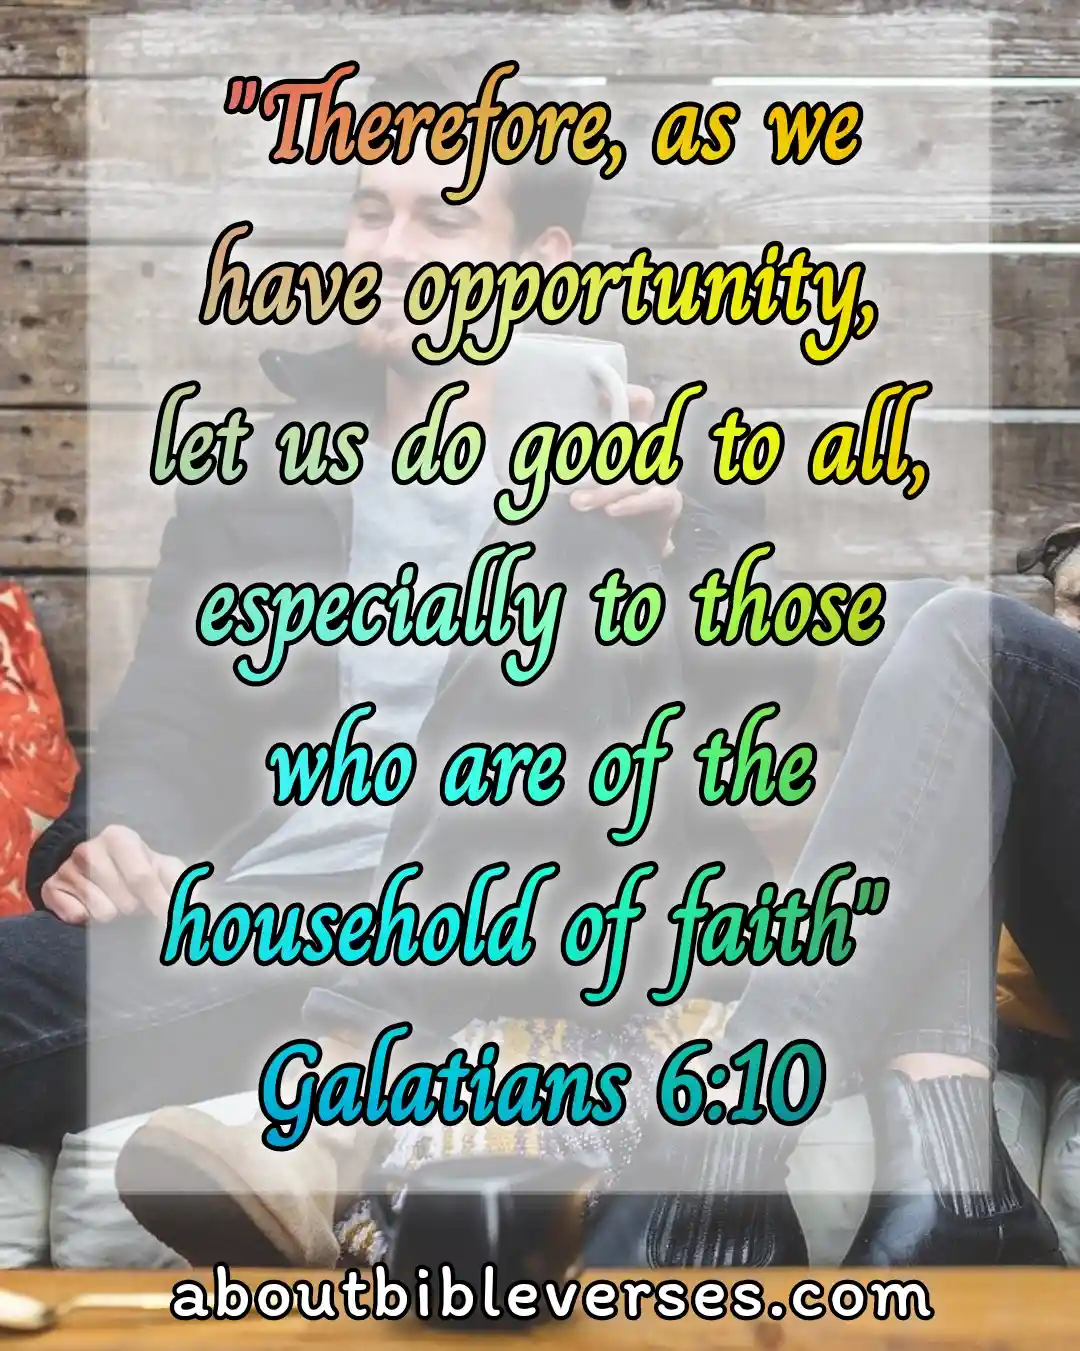 ible Verses About Doing Good (Galatians 6:10)